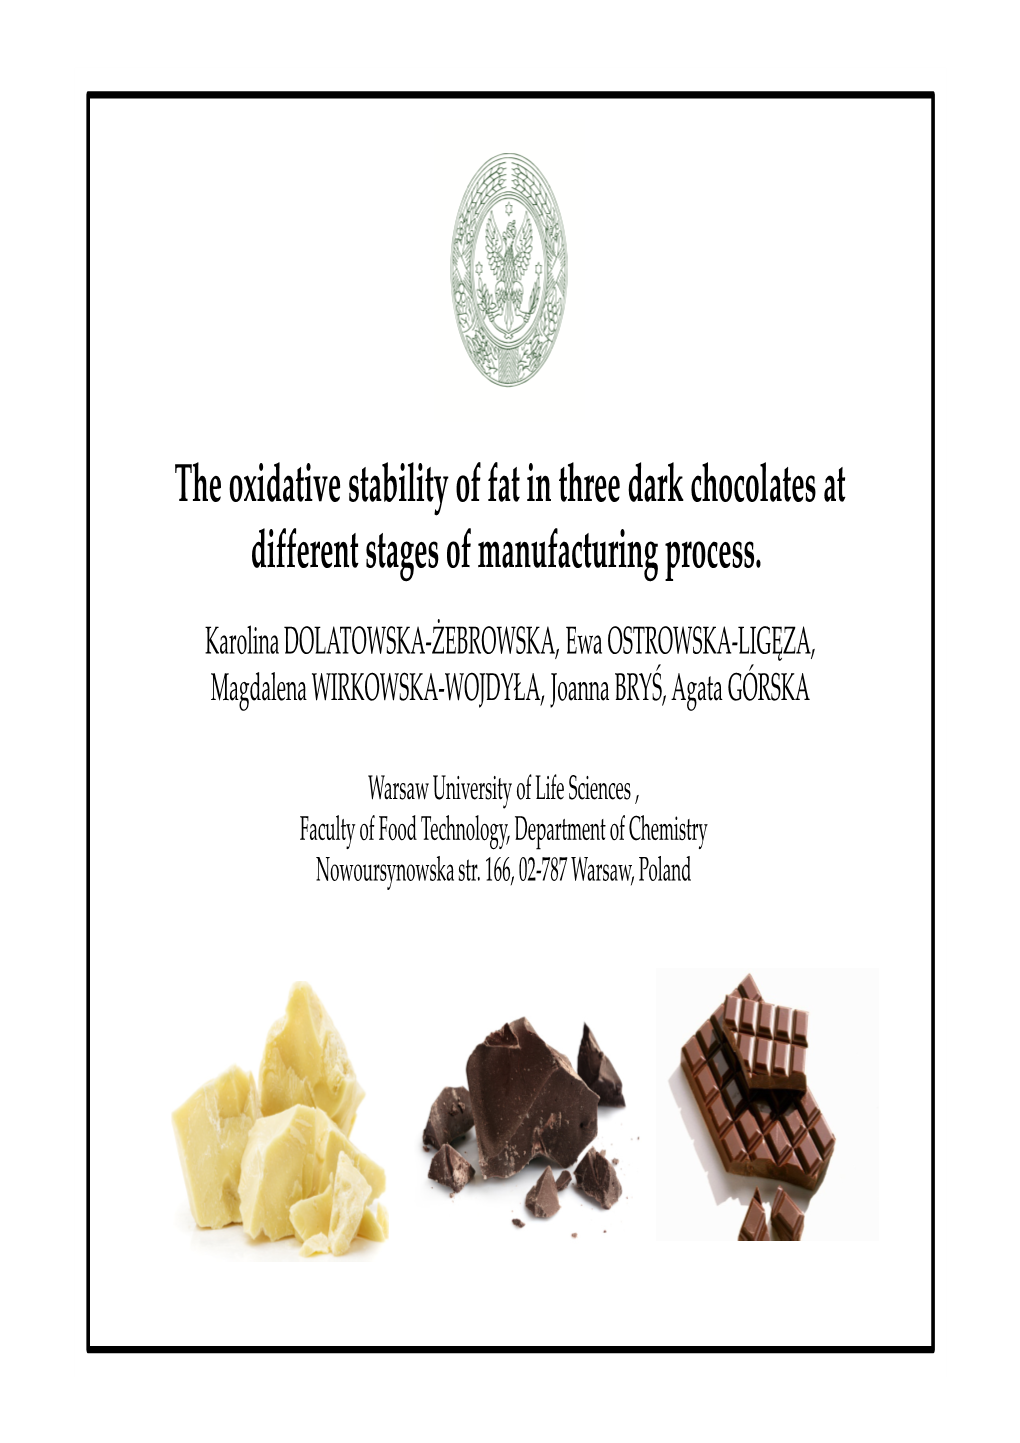 The Oxidative Stability of Fat in Three Dark Chocolates at Different Stages of Manufacturing Process